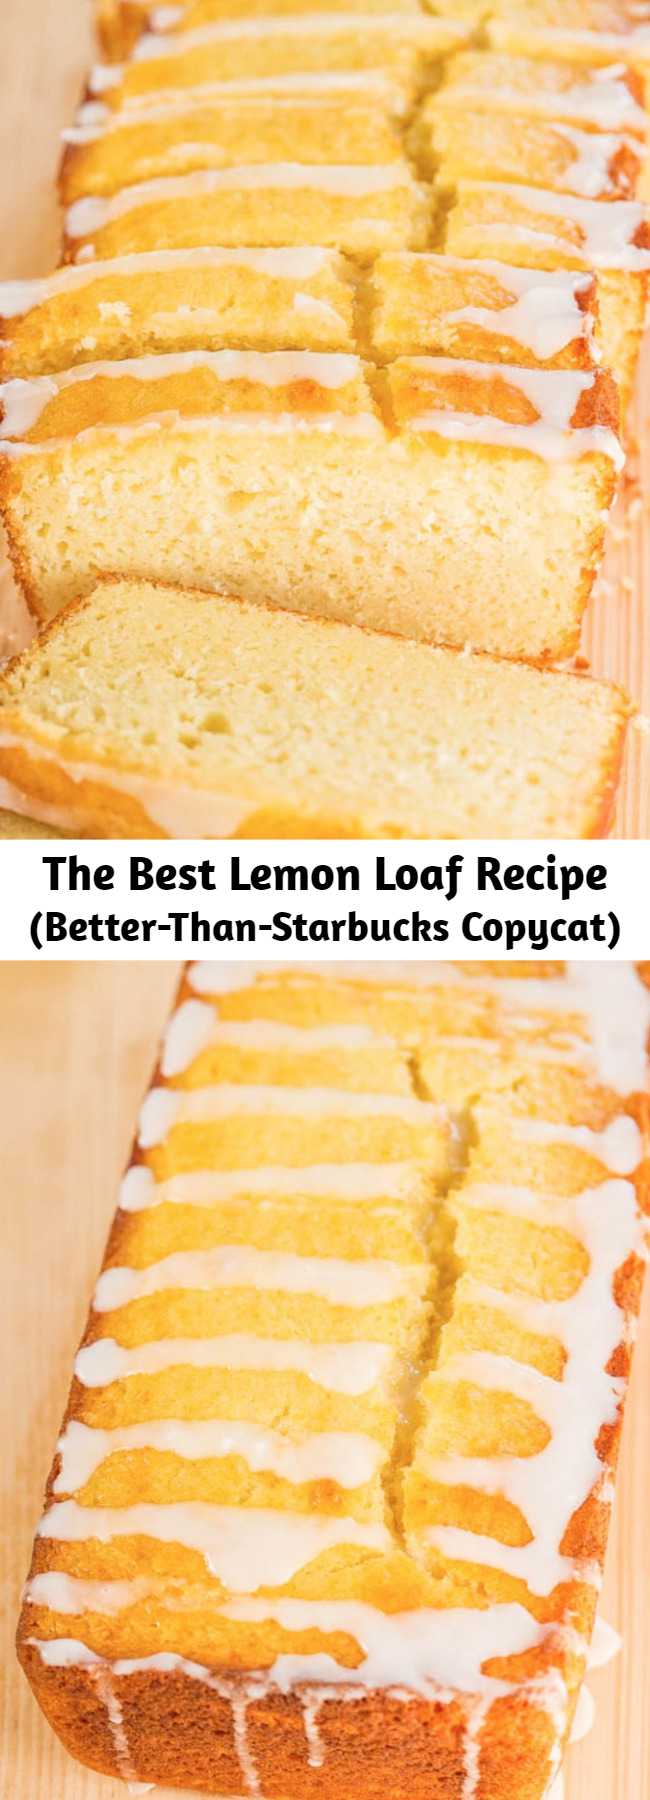 The Best Lemon Loaf Recipe (Better-Than-Starbucks Copycat) - It took years, but I finally recreated it!! Easy, no mixer, no cake mix, dangerously good, and SPOT ON!! You're going to love this lemon pound cake recipe!